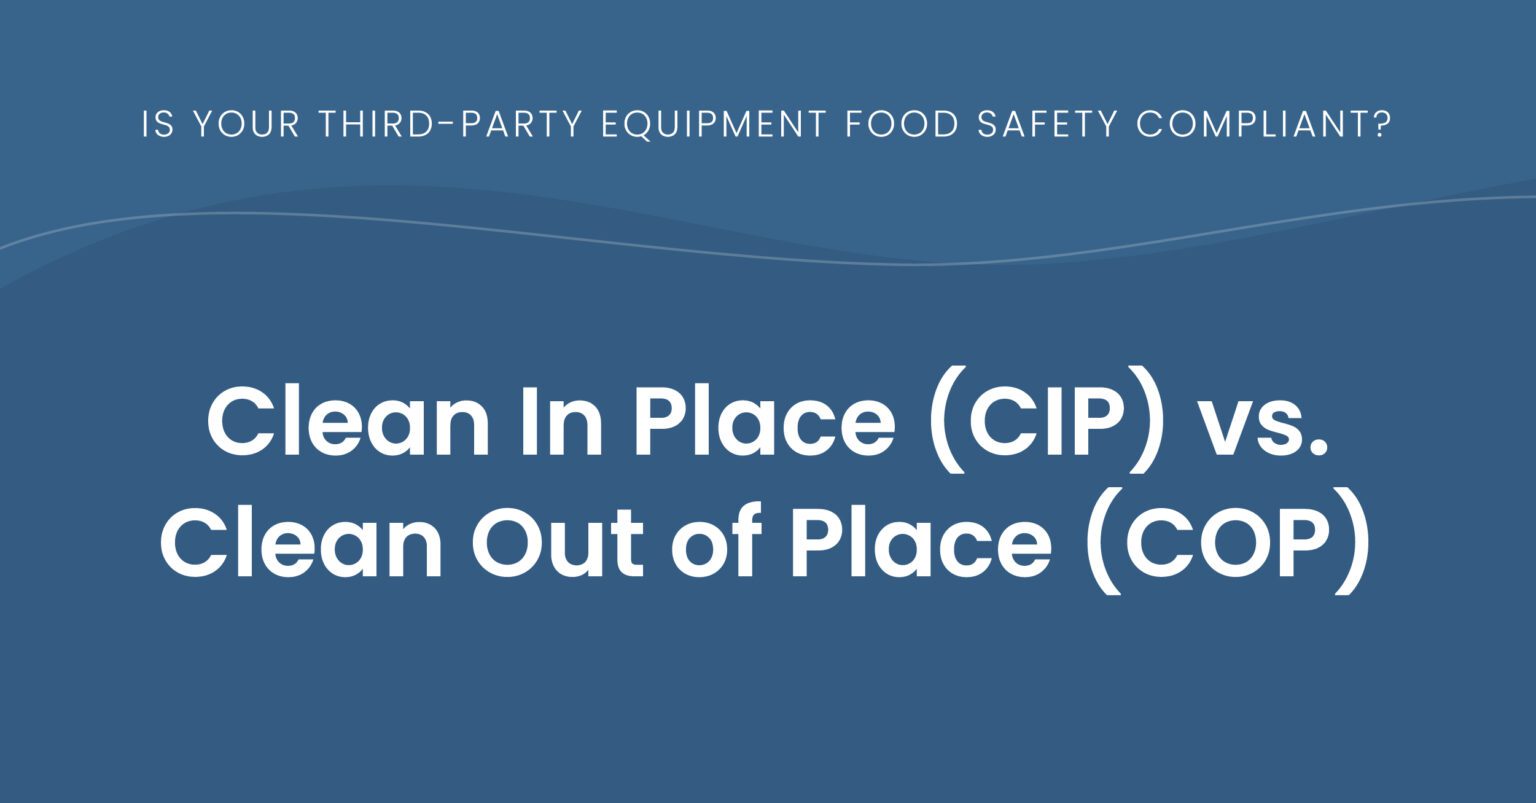 Text over a blue wavy background that says, "Is Your Third-Party Equipment Food Safety Compliant? Clean In Place (CIP) vs. Clean Out of Place (COP)"